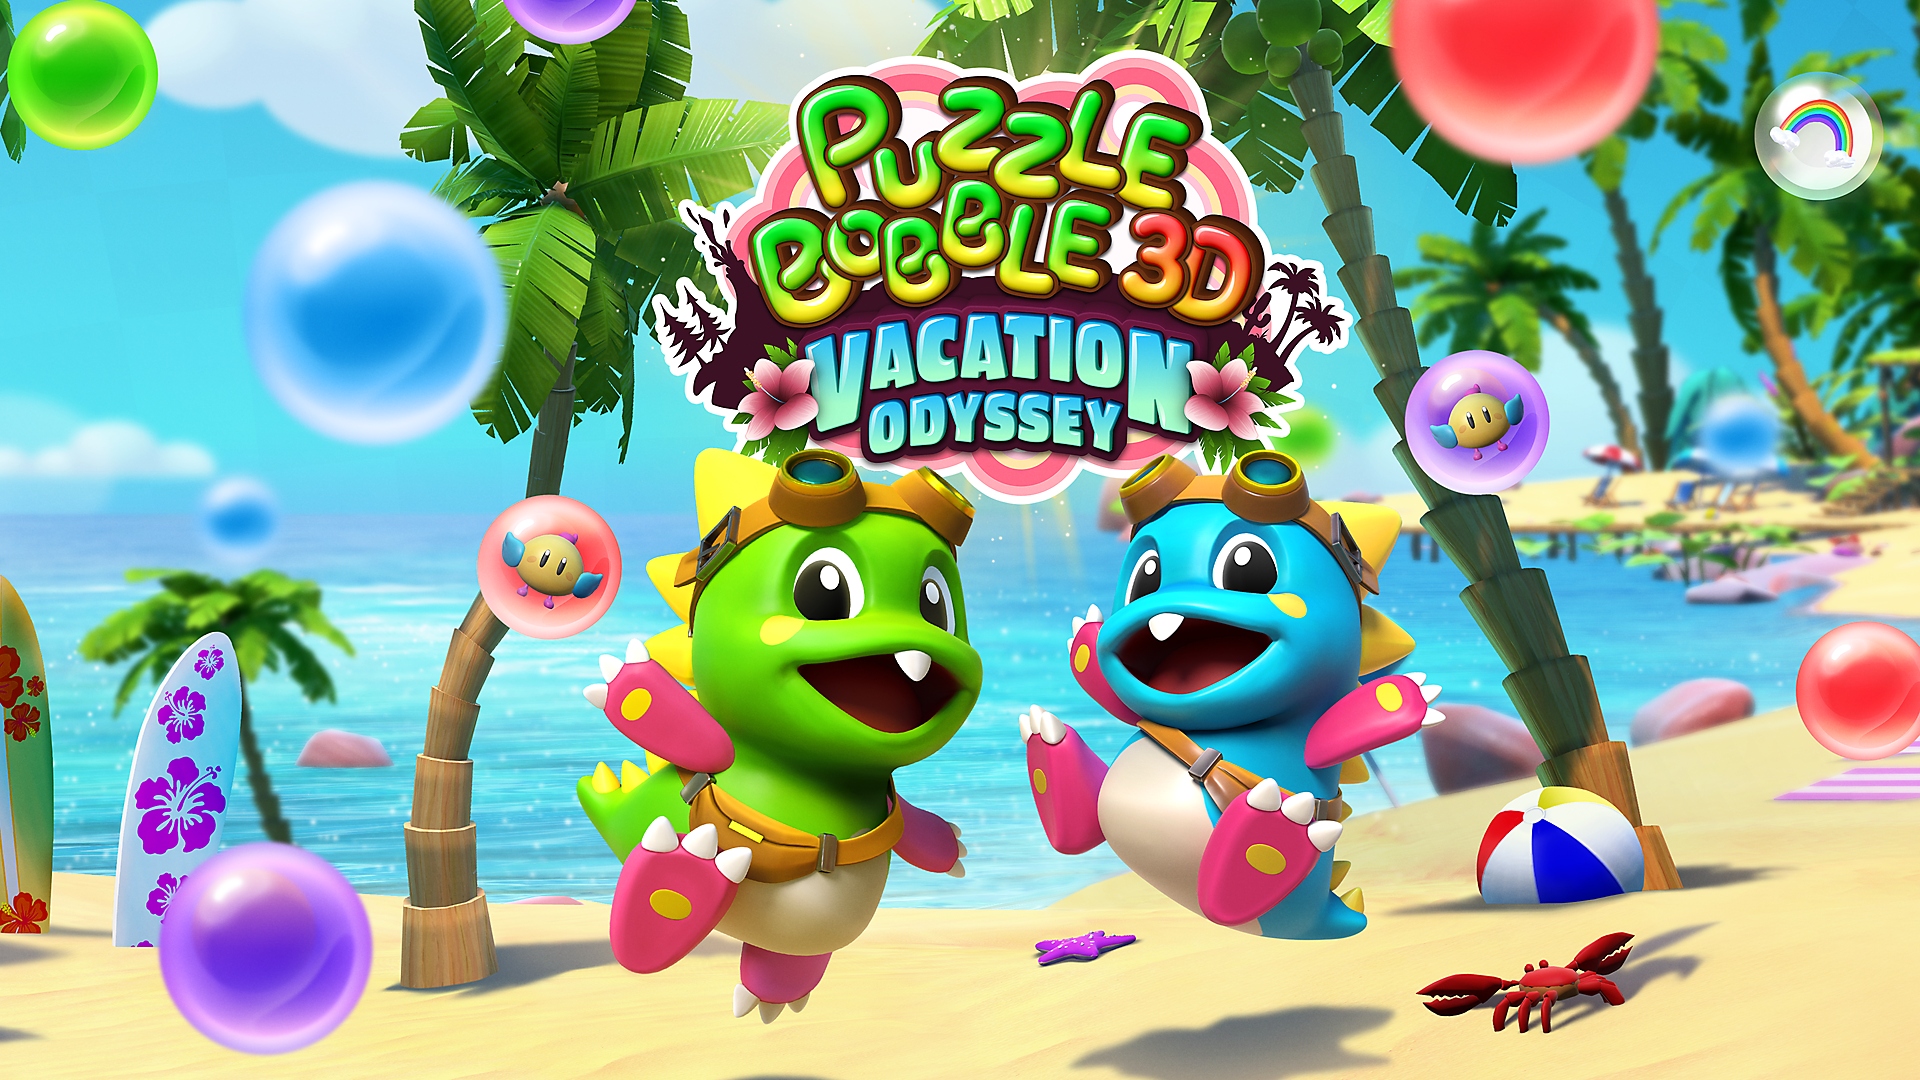 Puzzle Bobble 3D: Vacation Odyssey artwork